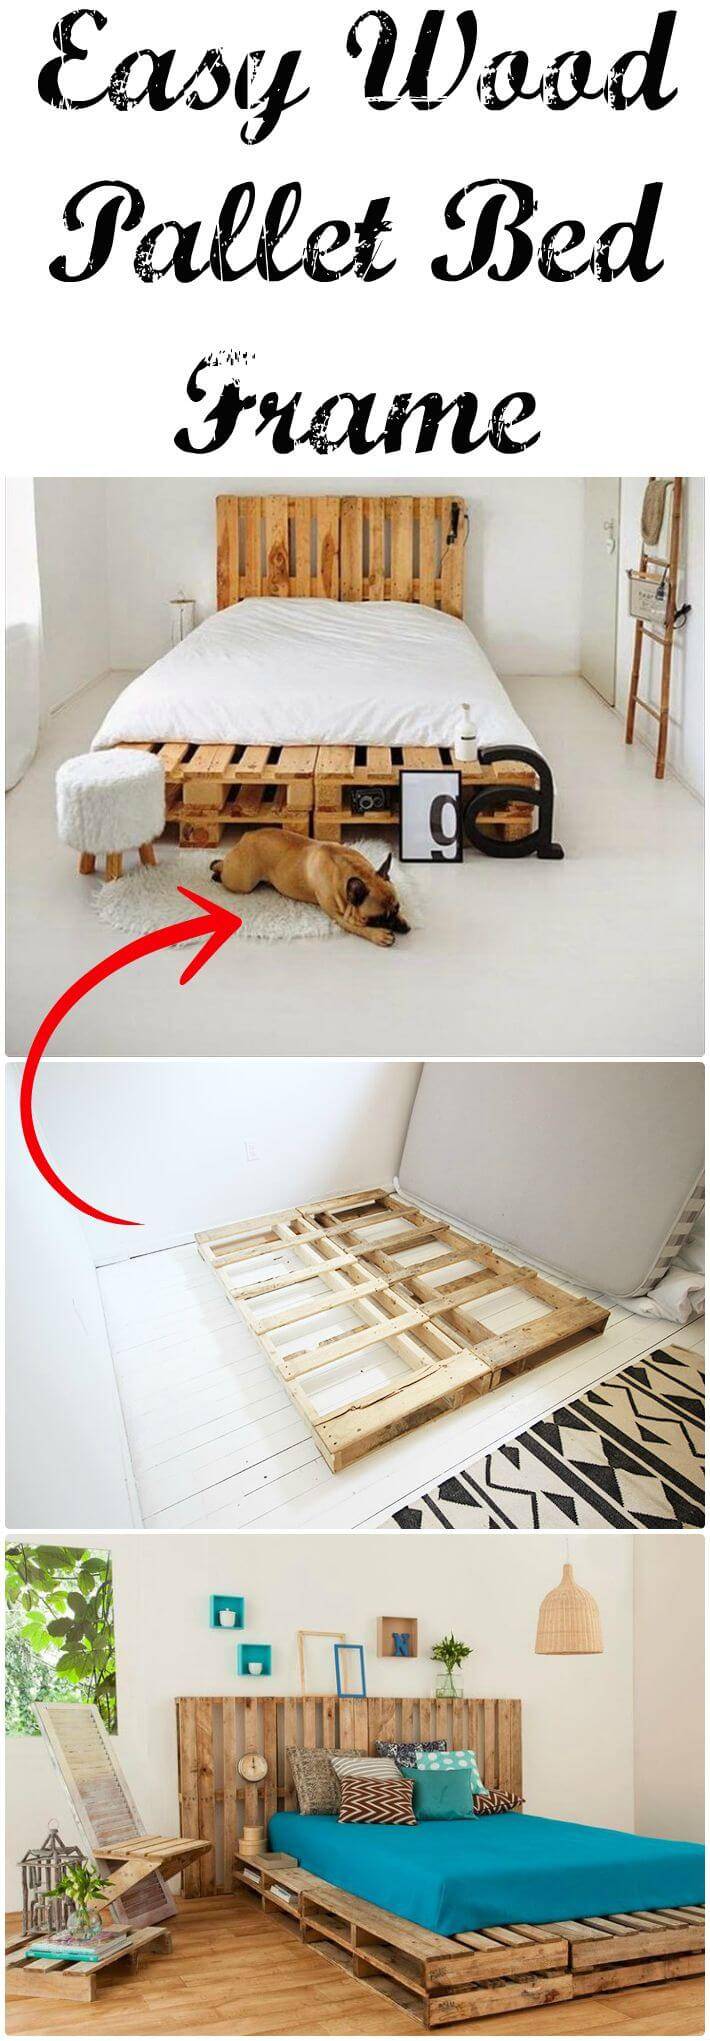 11 Diy Pallet Bed Frame Ideas With Step